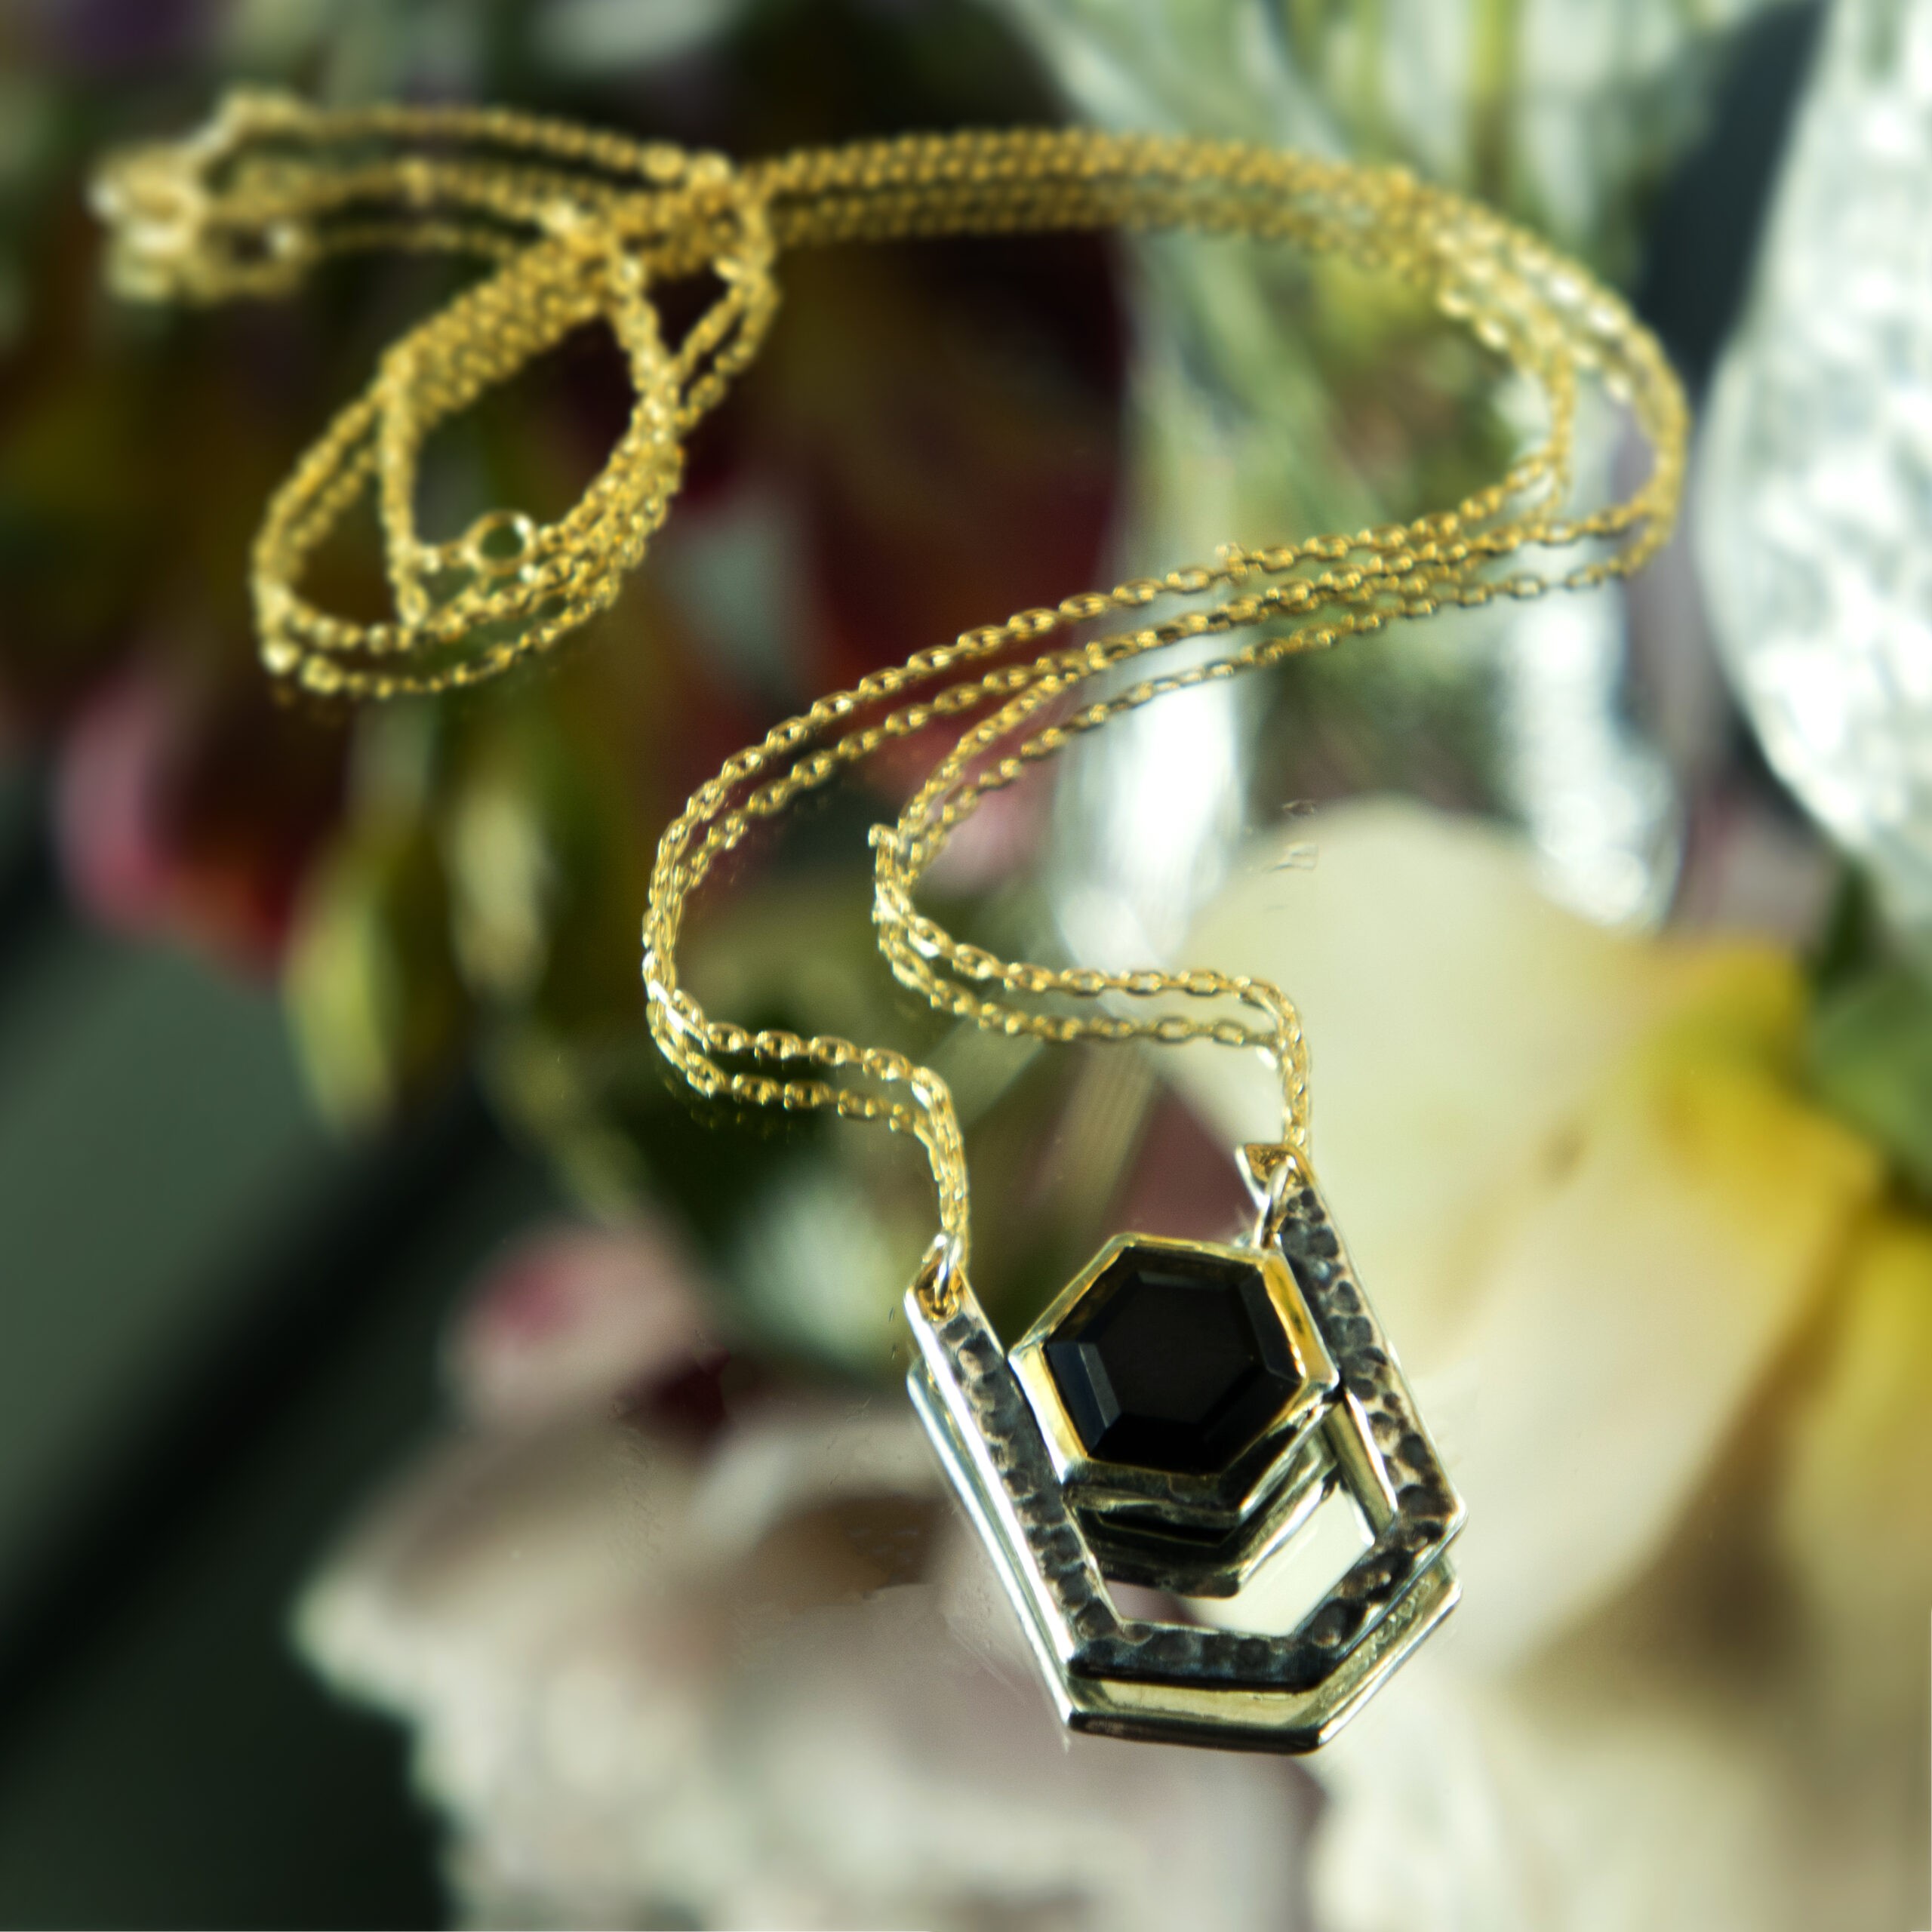 Healing Crystal Jewelry: Necklaces, Bracelets, Earrings, & More